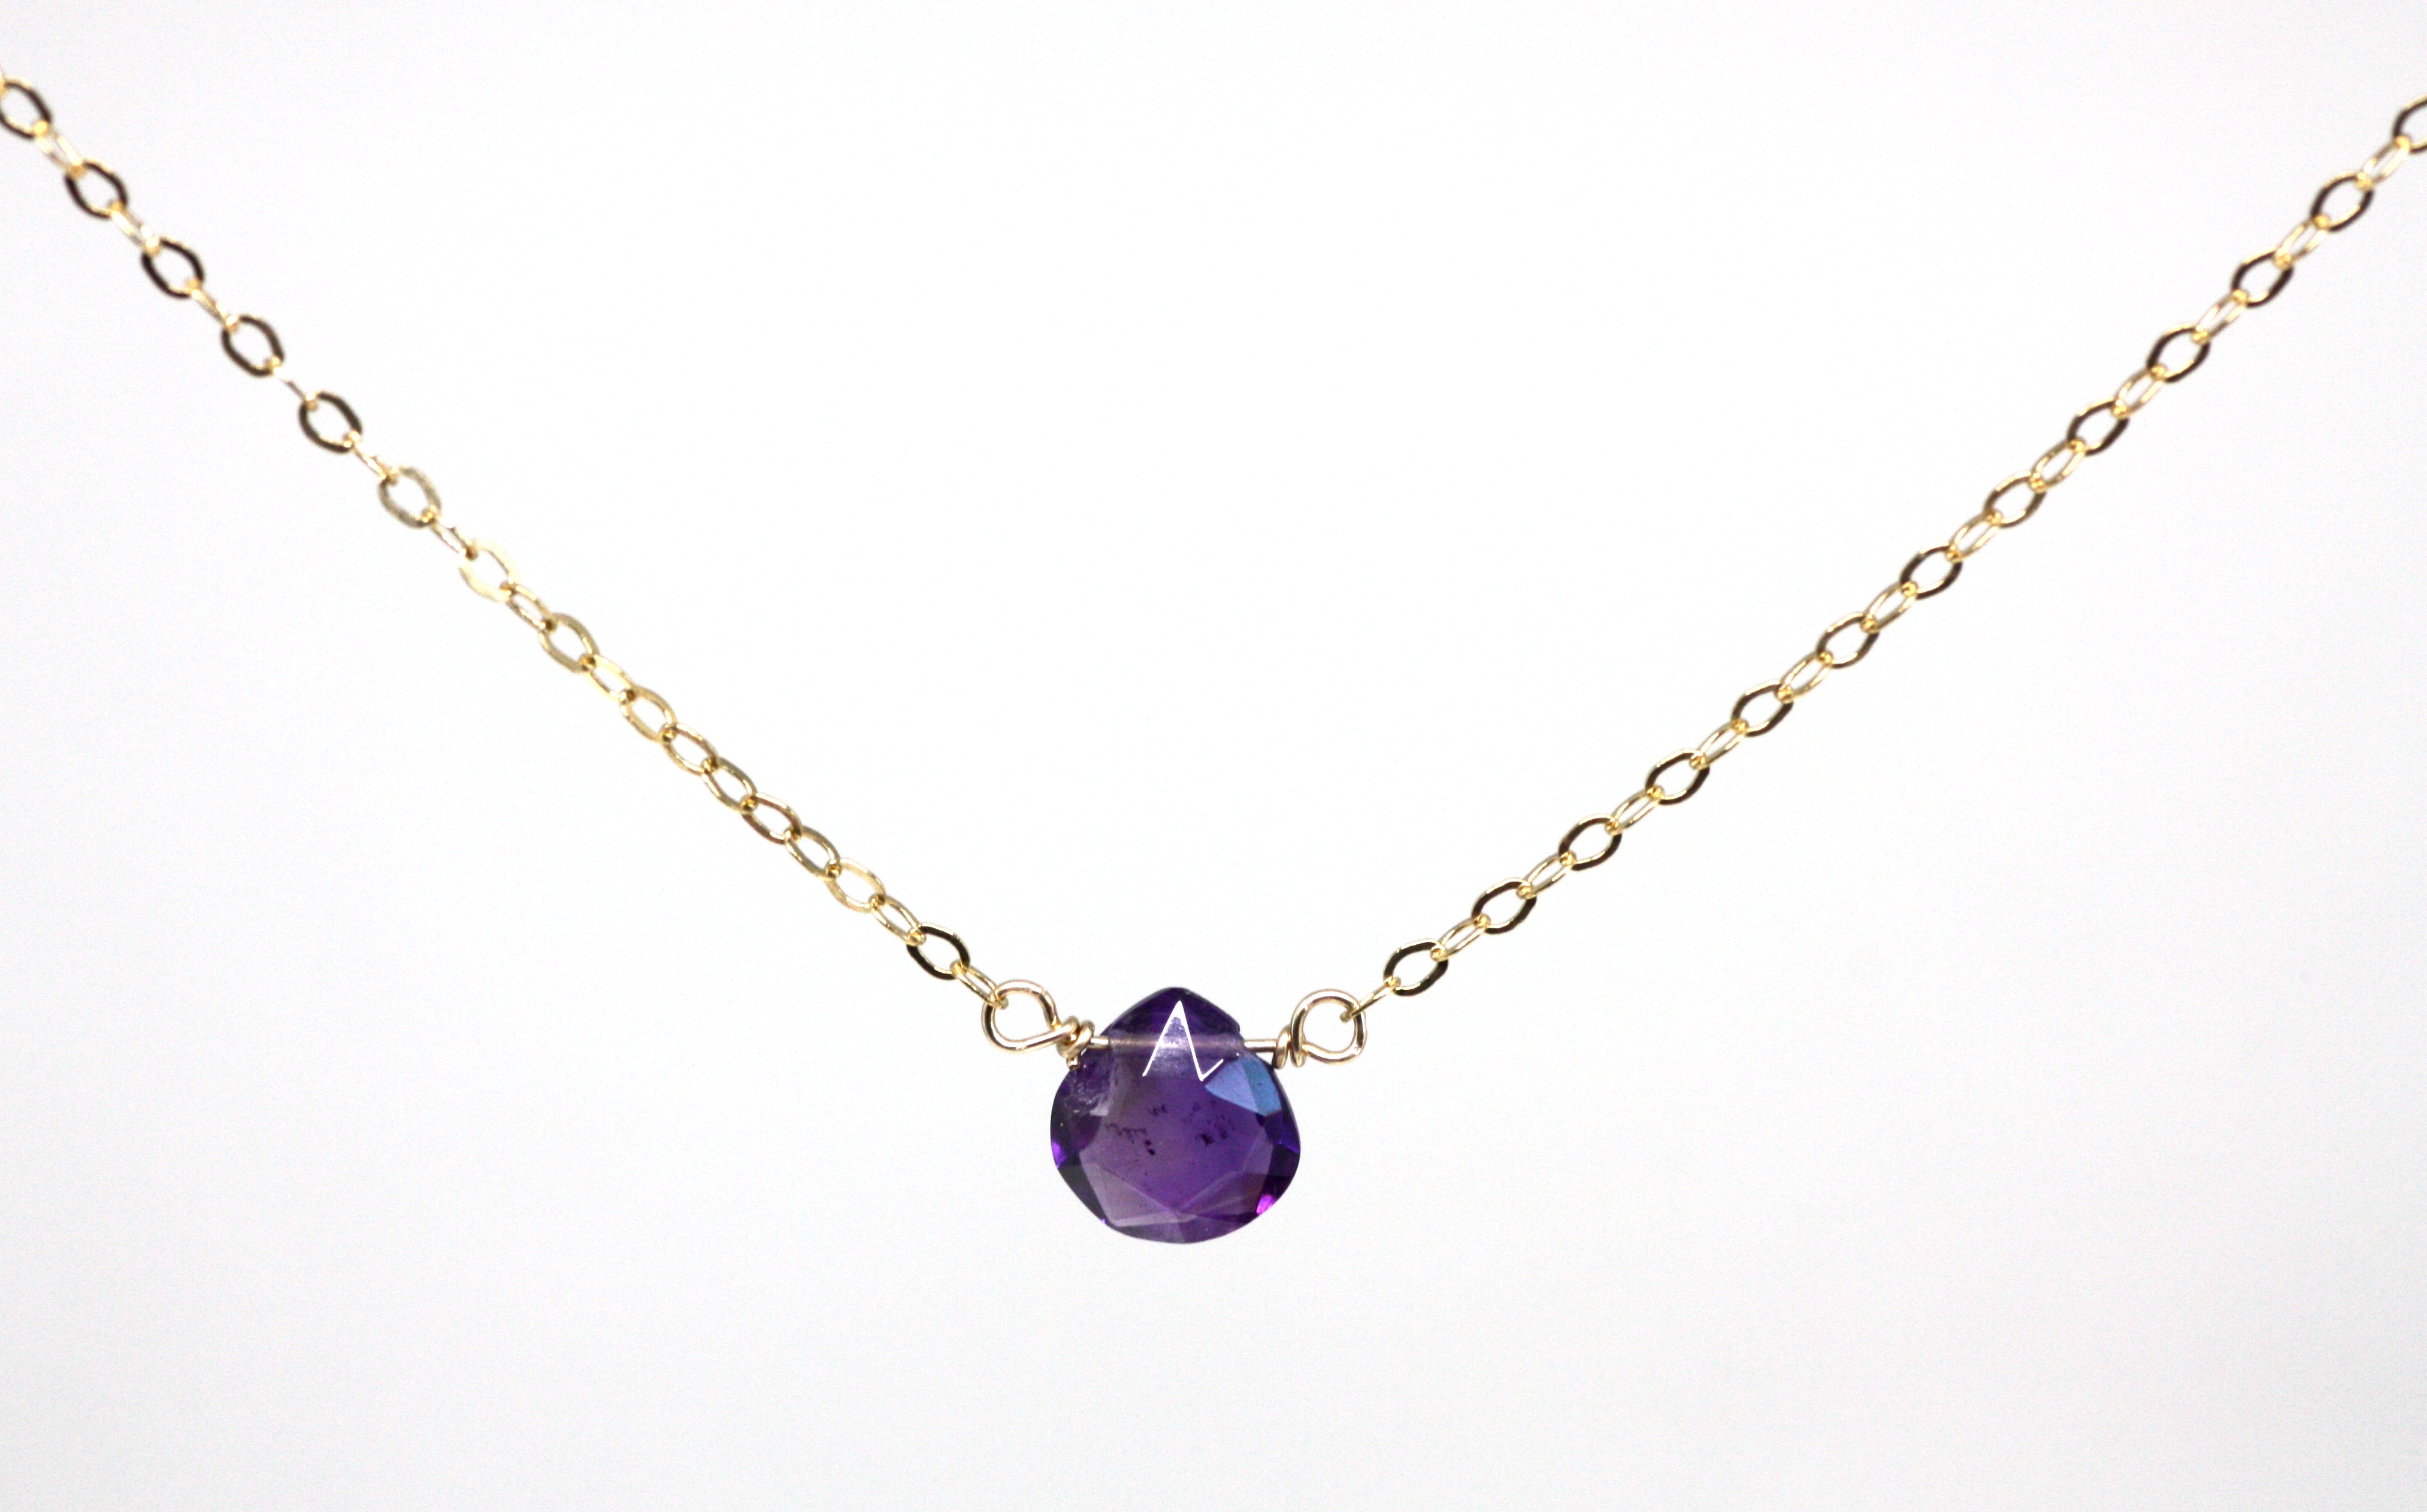 Amethyst Small Pendant Necklace